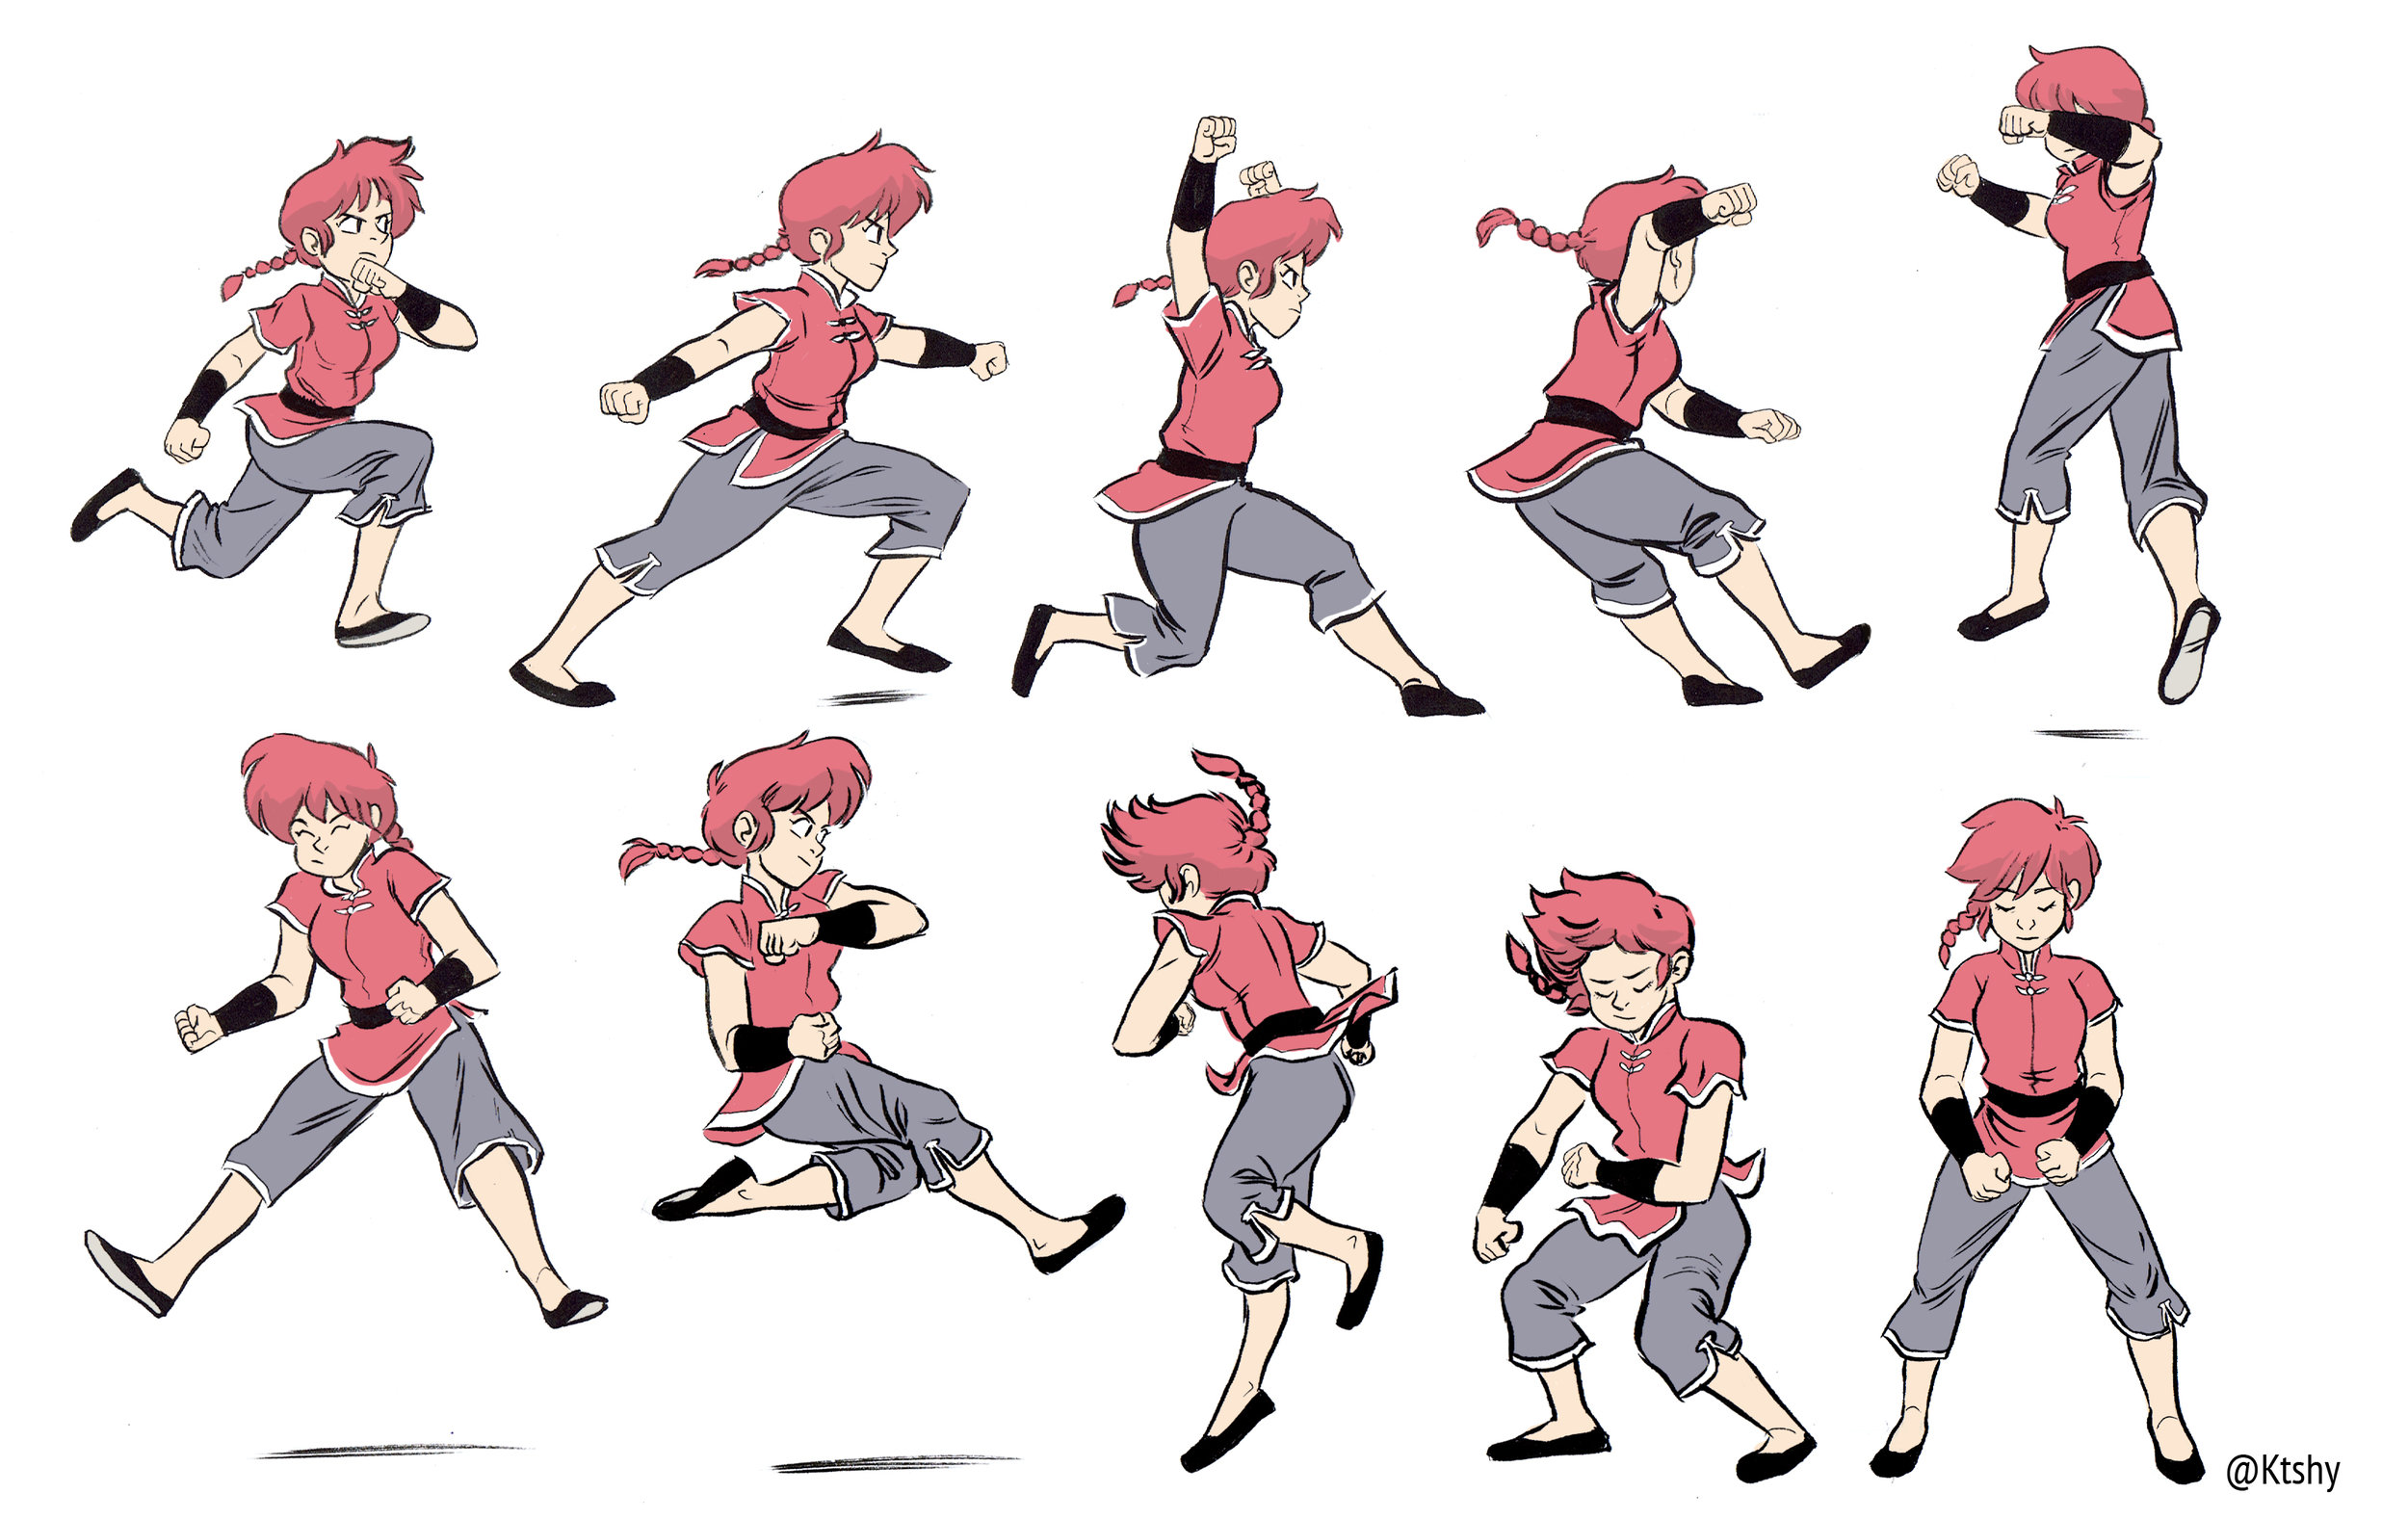  Ranma referencing poses from  bodiesinmotion.photo  